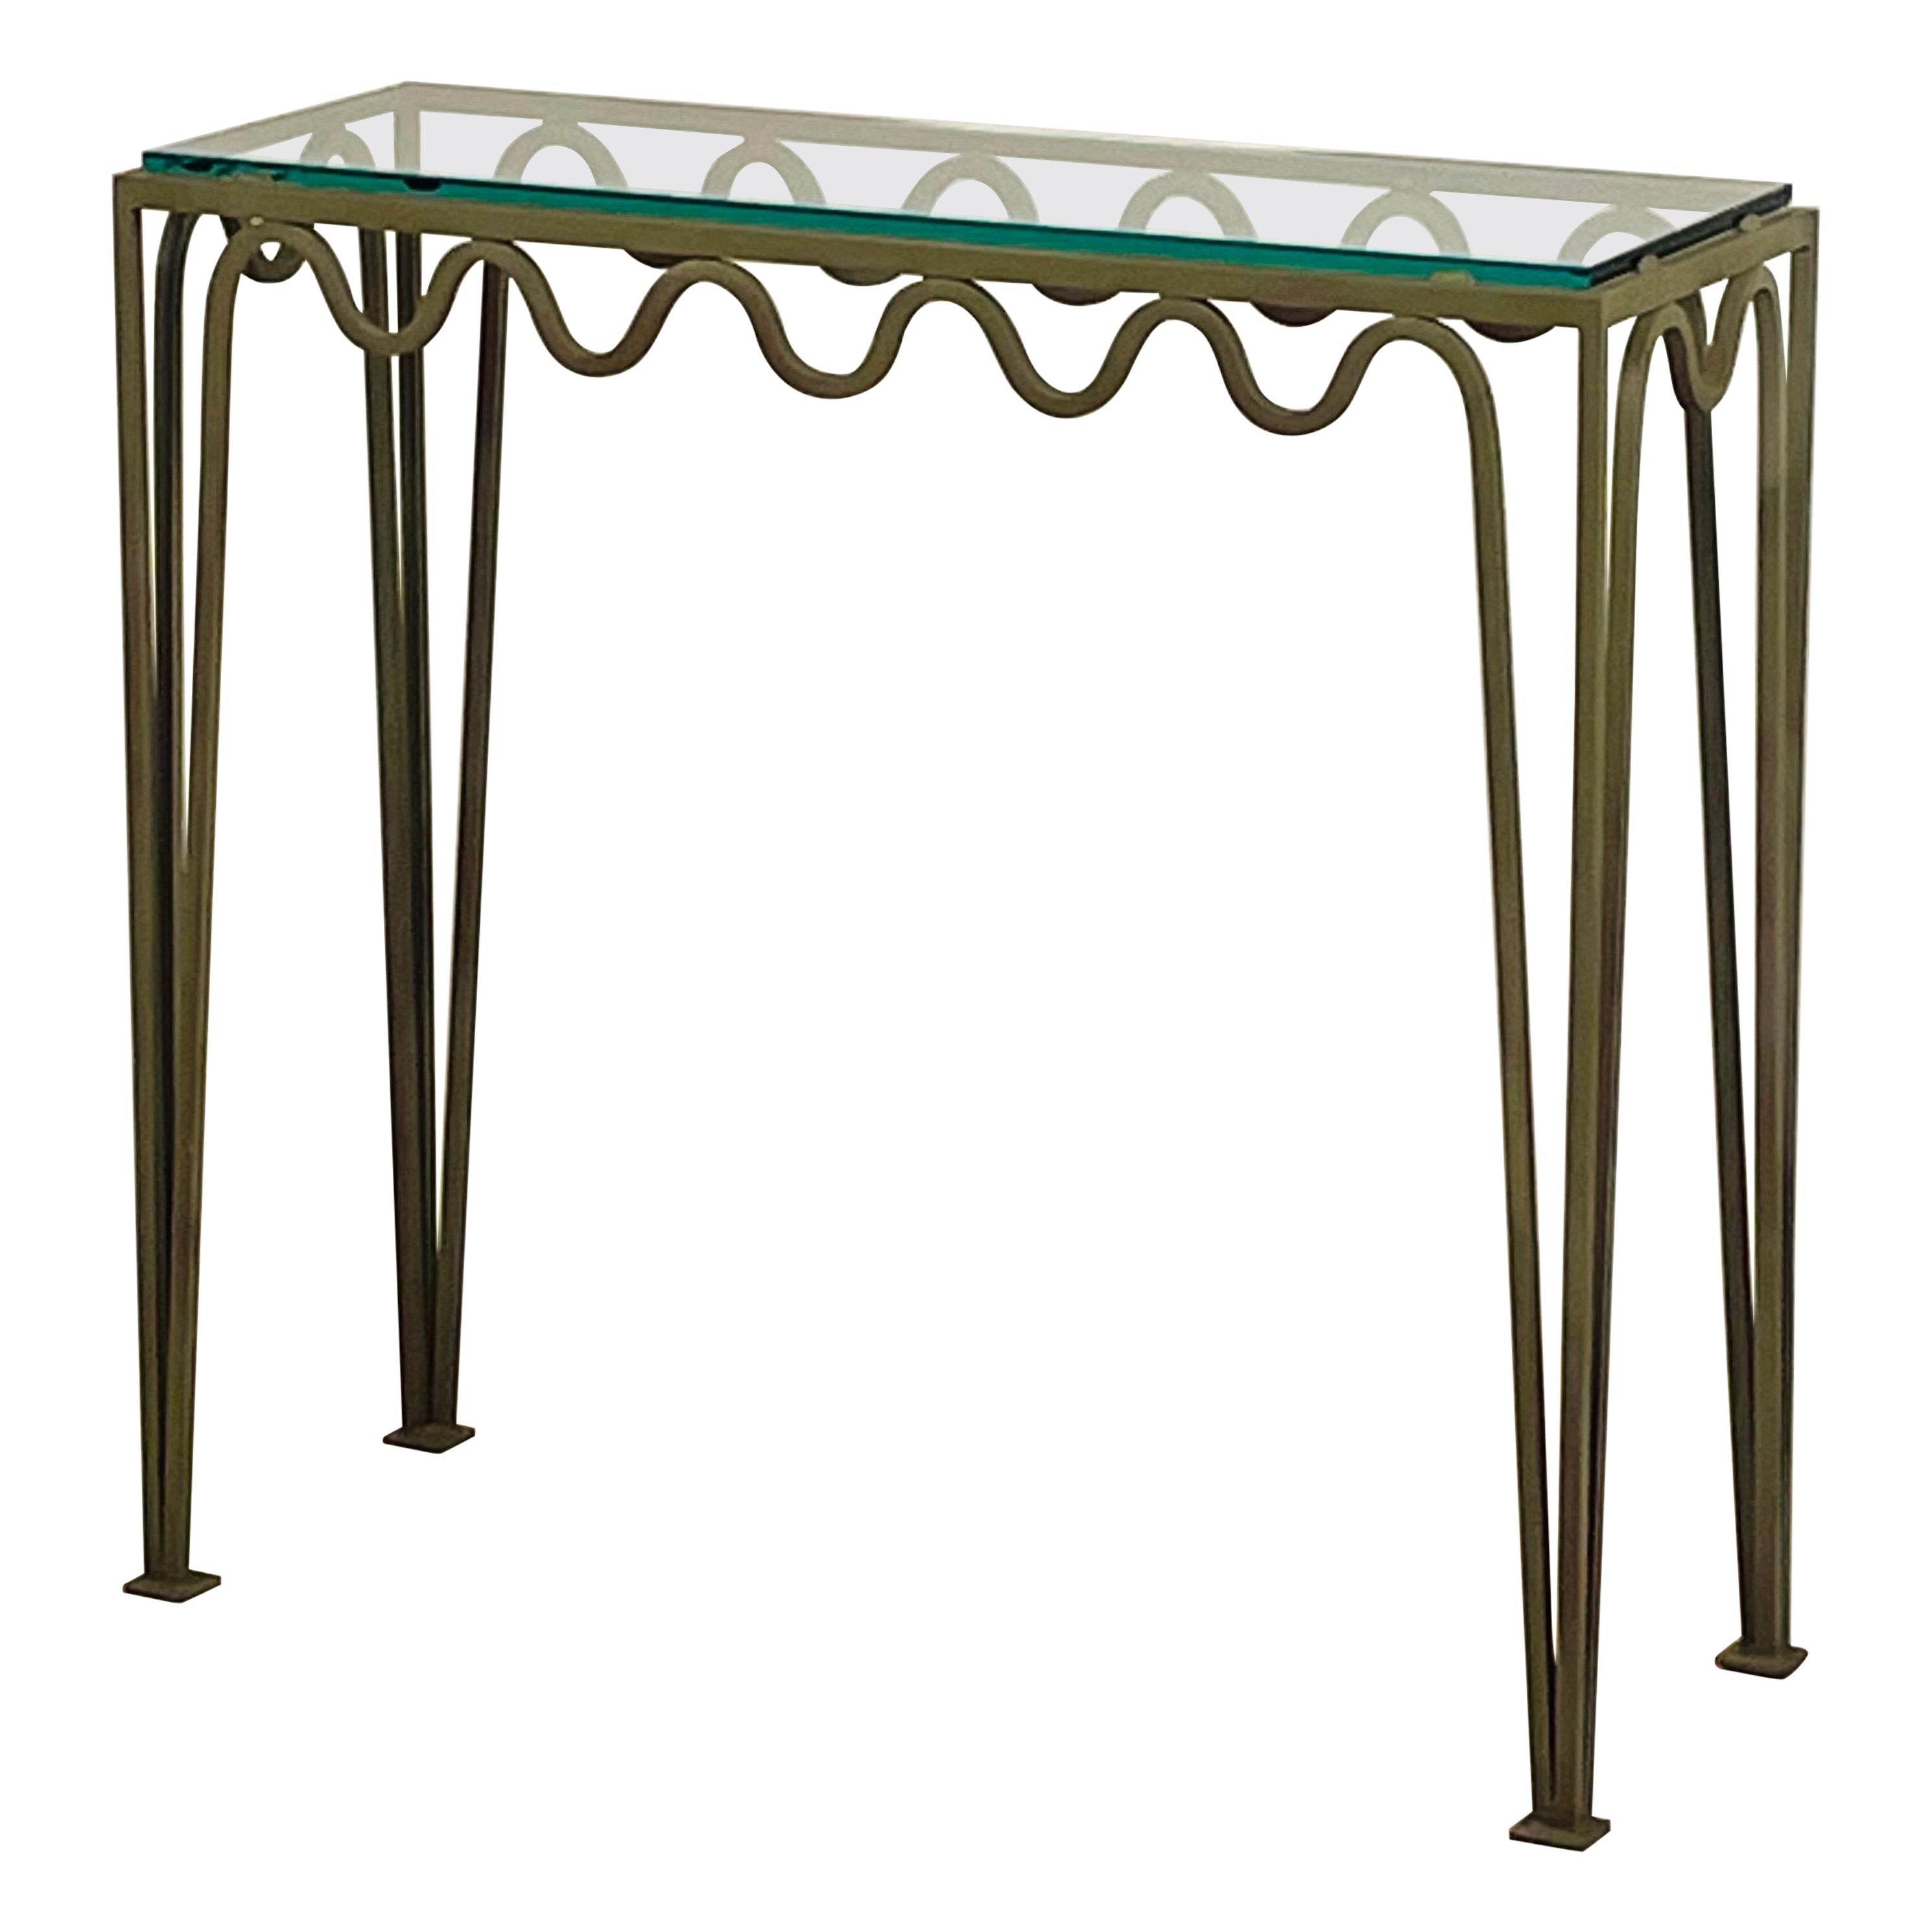 Chic Verdigris 'Meandre' and Glass Console by Design Frères For Sale